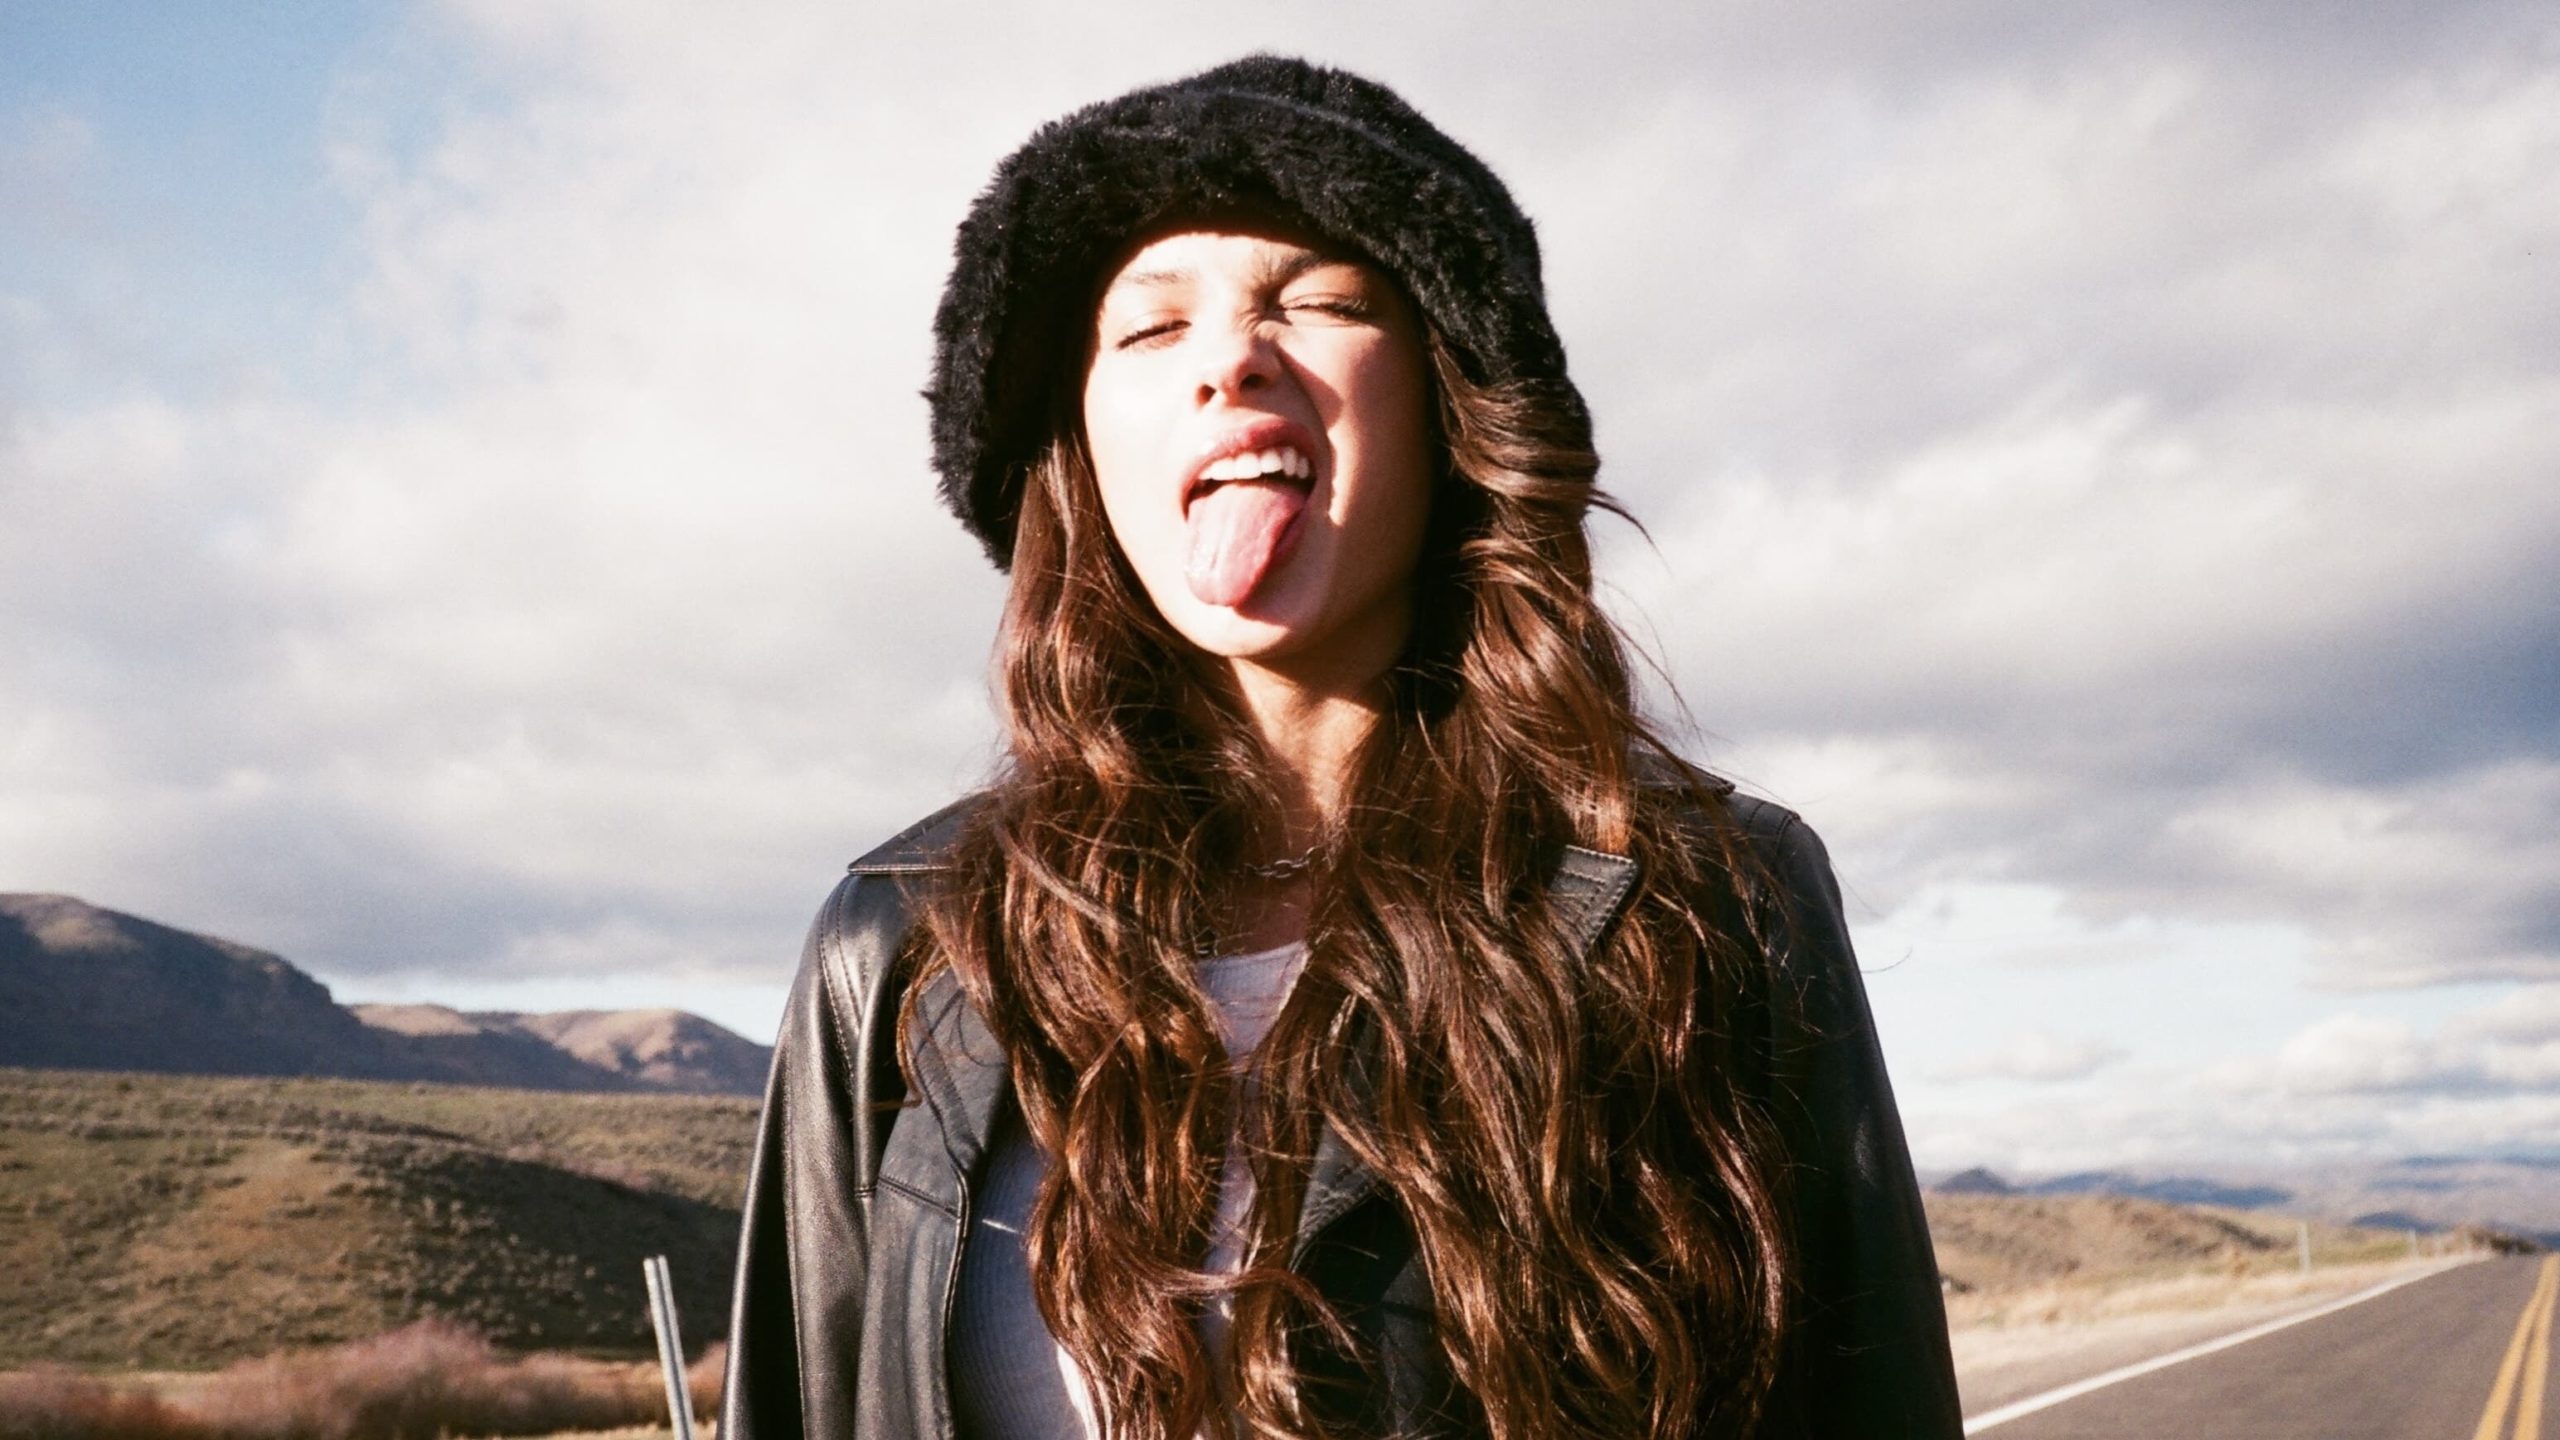 olivia rodrigo wearing a black jacket, she's sitcking her tongue out in a pose